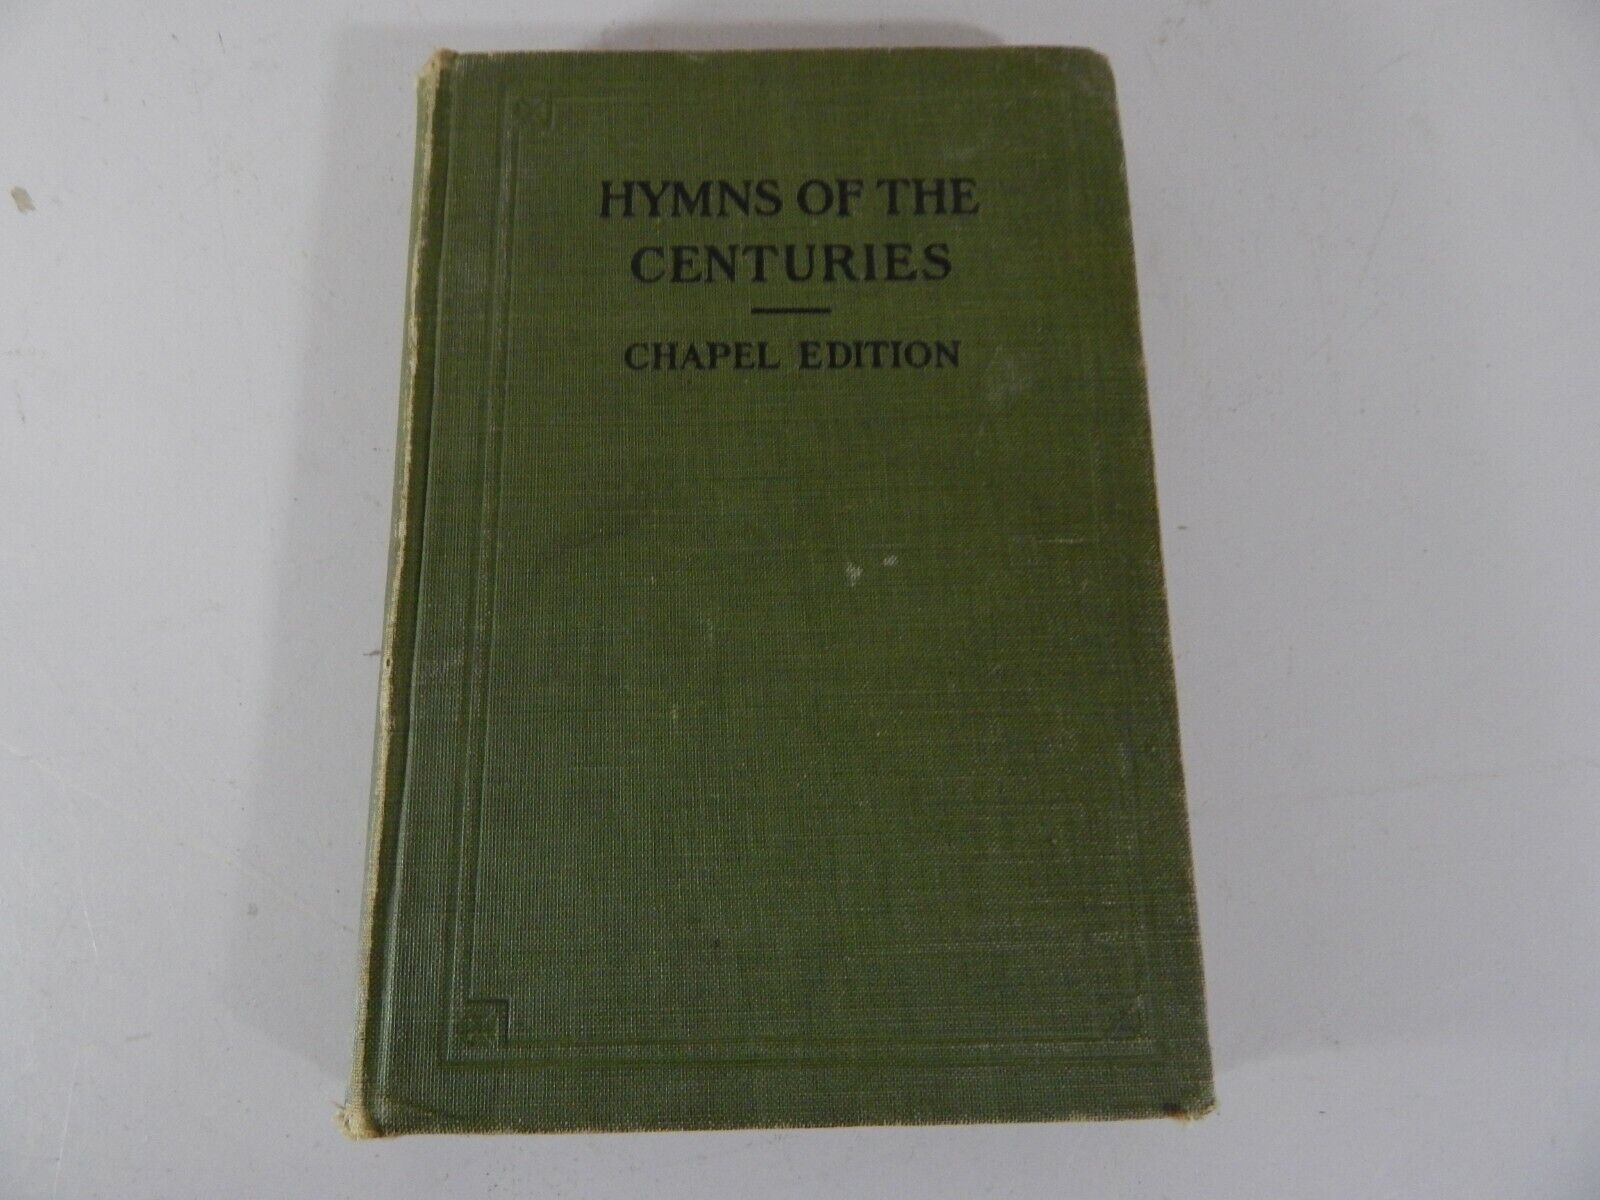 Vintage Hymns Of The Centuries Chapel Edition (1911) For Use In Baptist Churches